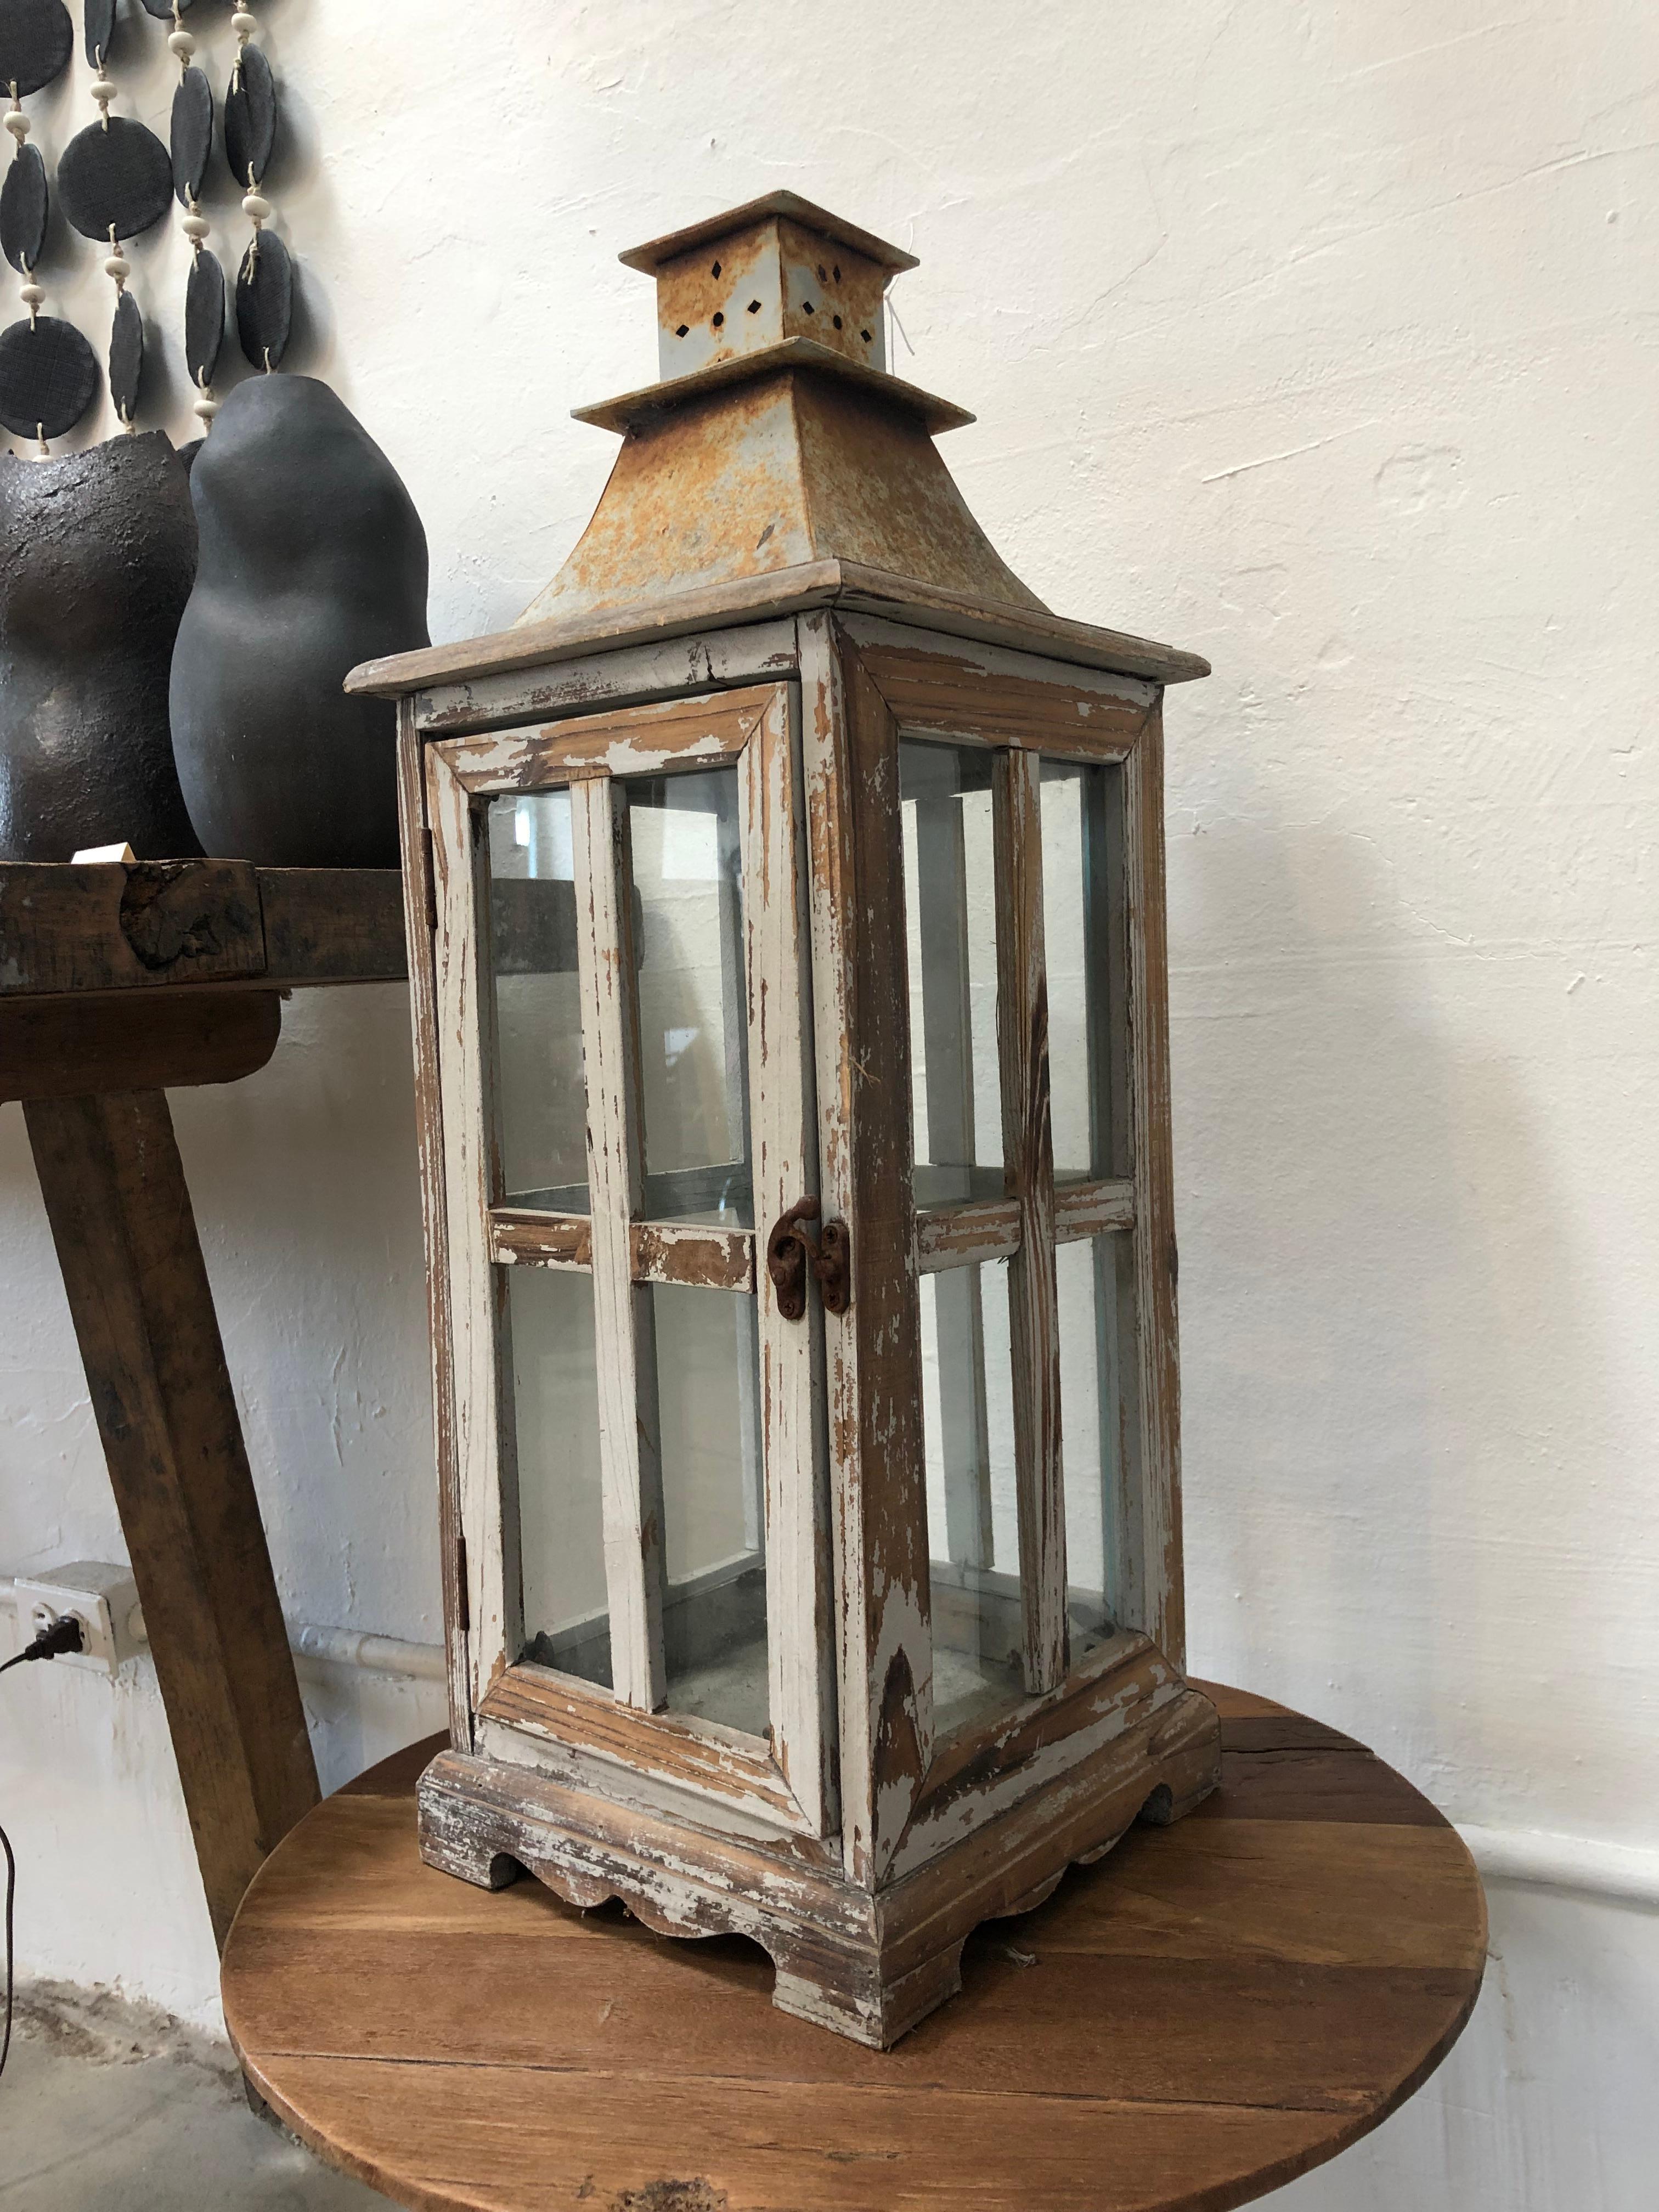 This vintage wood large Lantern has lots of charm due to the wear from its age. Featuring wood and metal, this lantern can be used outdoors or in an entryway. It has a hook lock as well which is still in working condition. Place a candle inside and